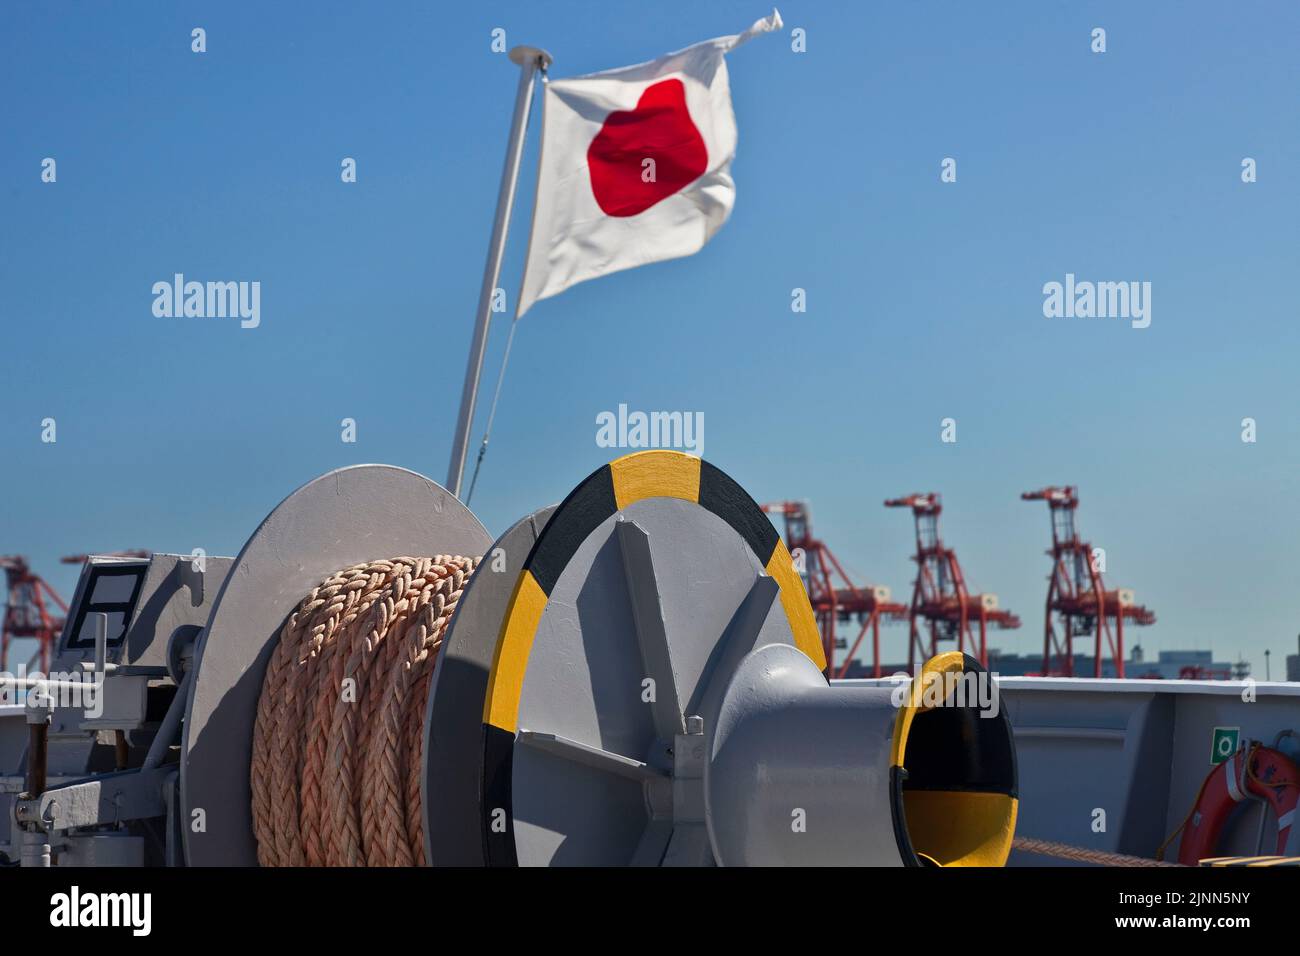 Japanese flag on stern of commercial fishing vessel Tokyo Bay Tokyo Japan Stock Photo